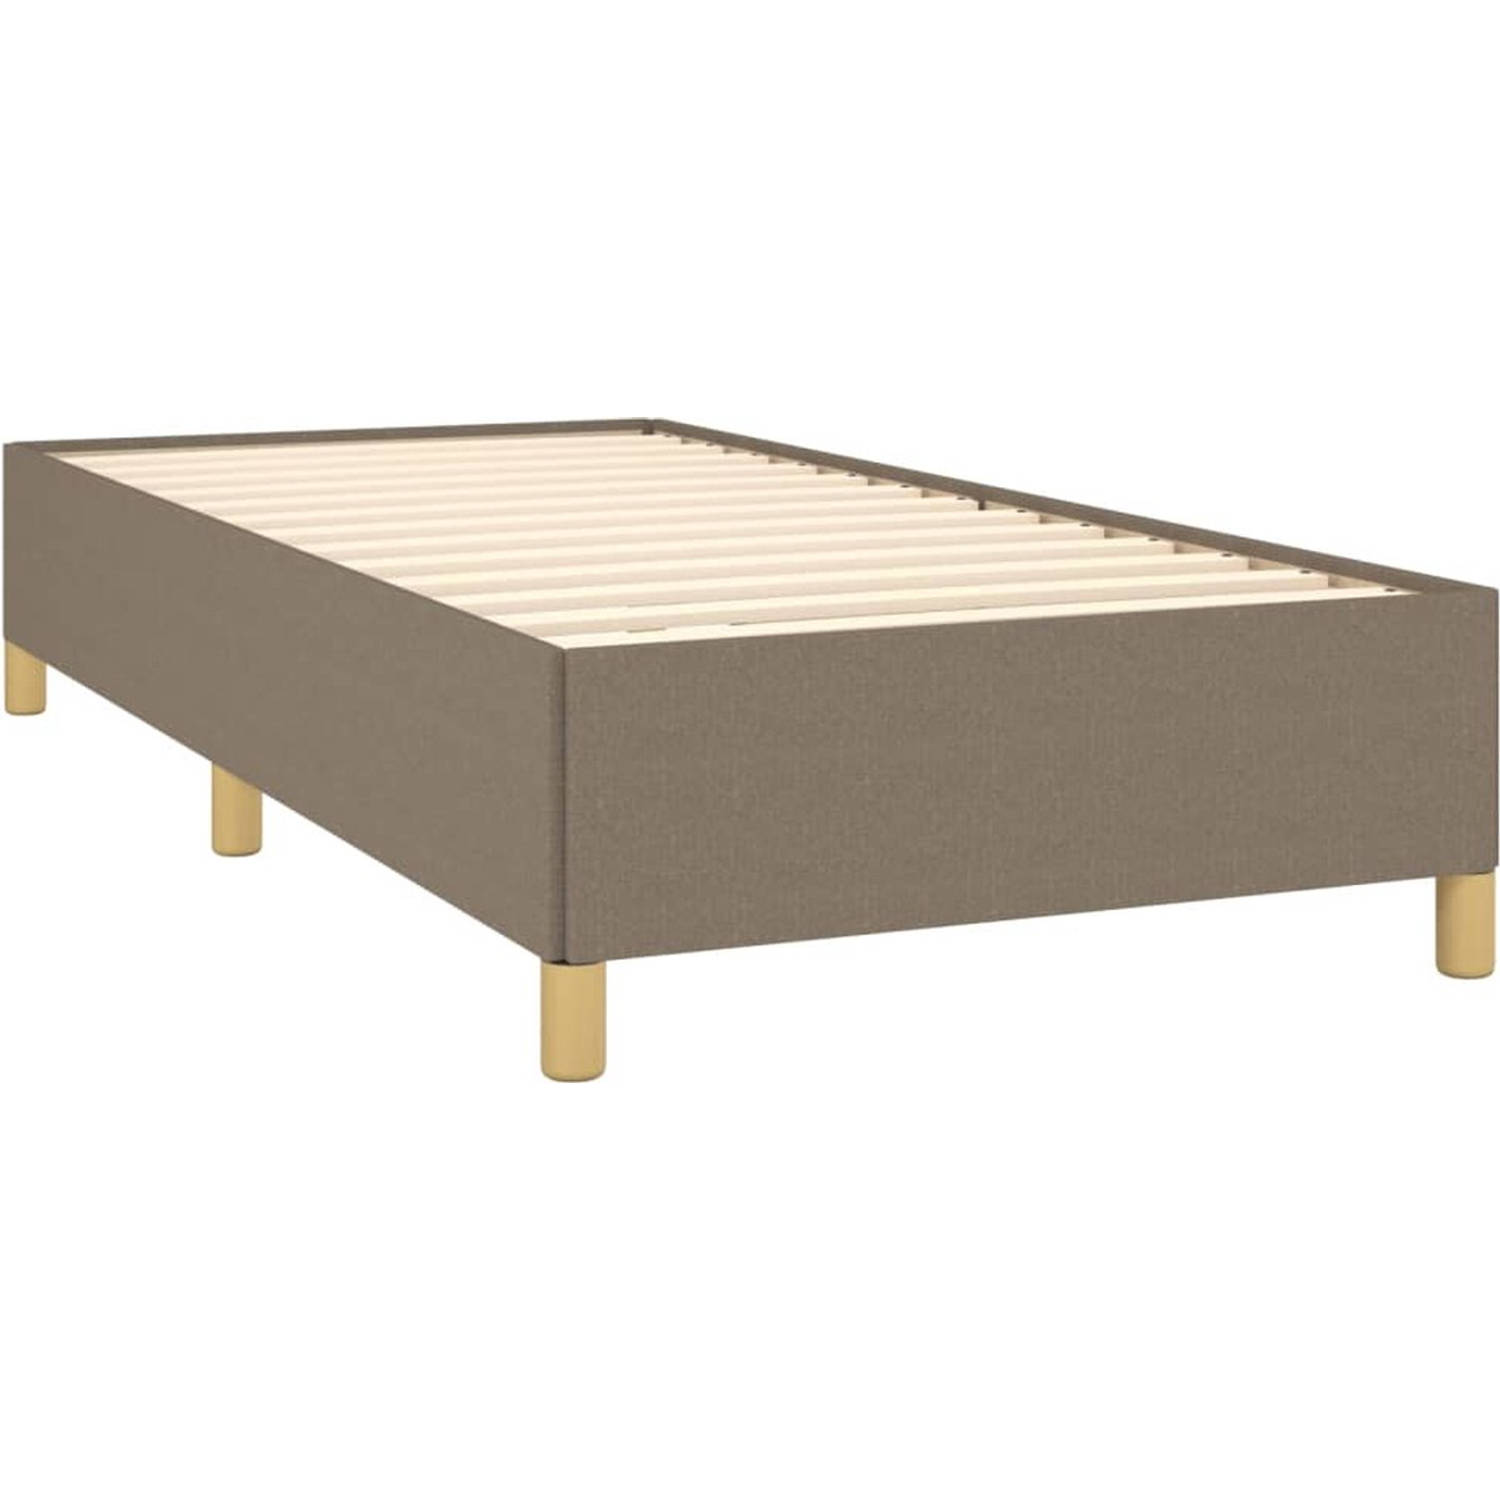 The Living Store Boxspringbed - Pocketvering - 80 x 200 cm - Taupe/White - Adjustable Headboard - Medium Support -